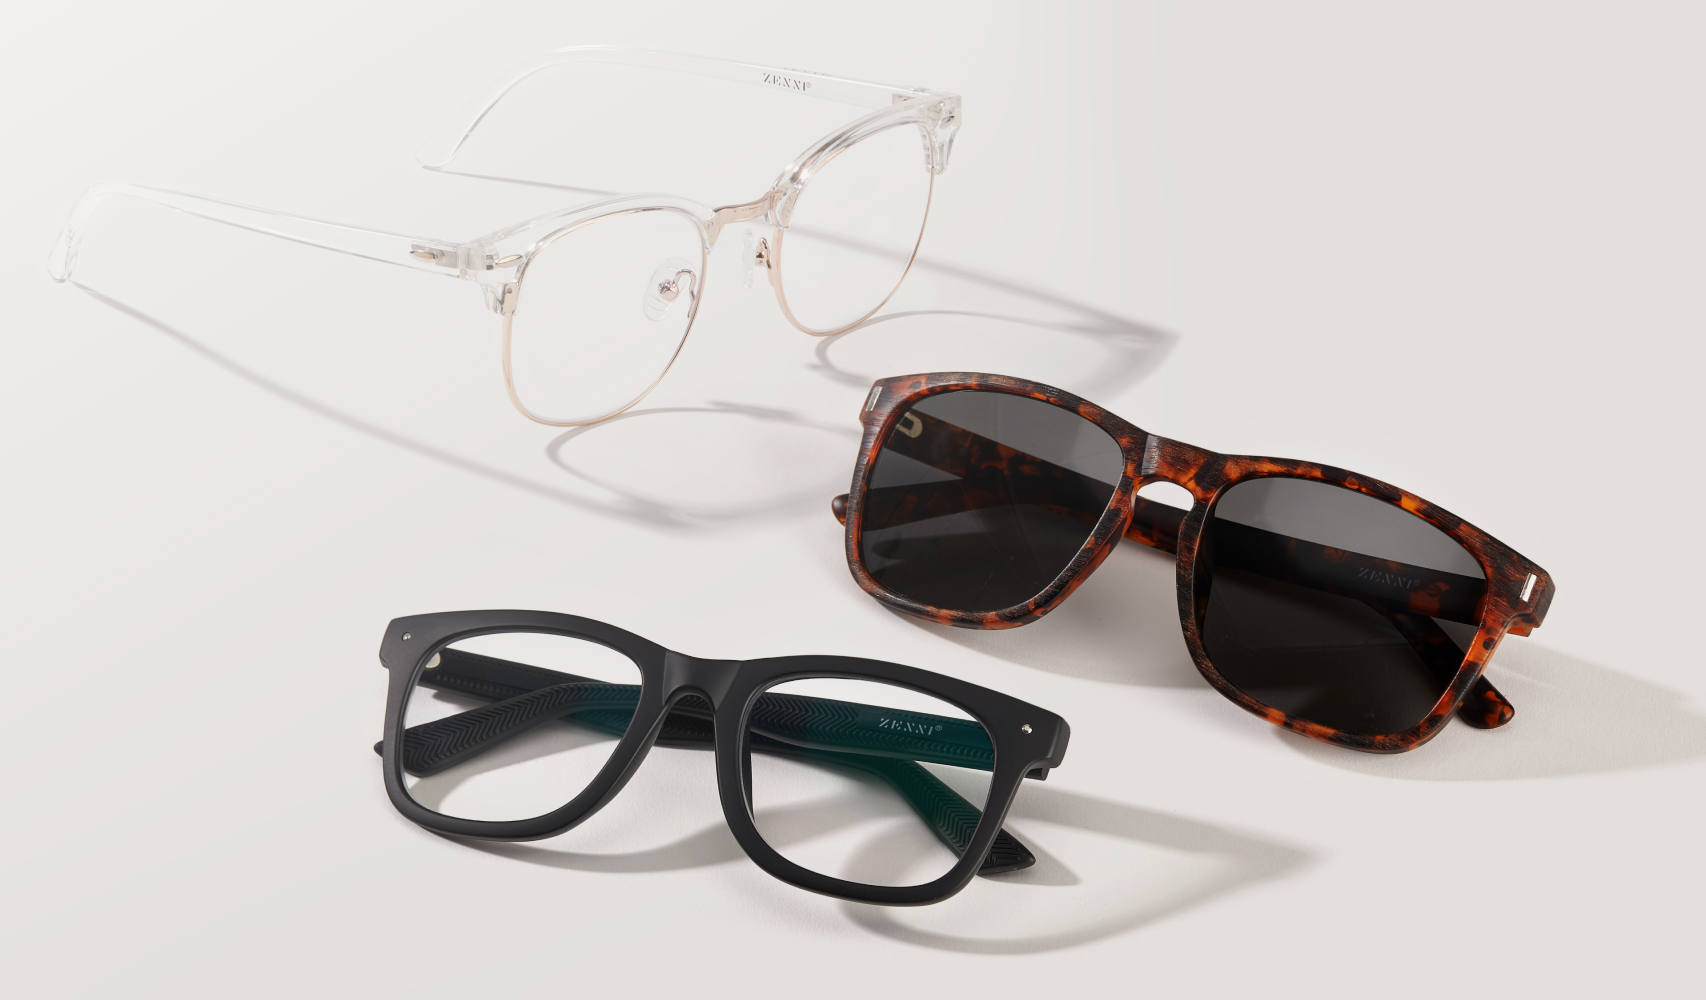 Image of three pairs of Zenni glasses and sunglasses. From top to bottom: clear browline #1913123, tortoiseshell square sunglasses #1116325, black square glasses #125221.